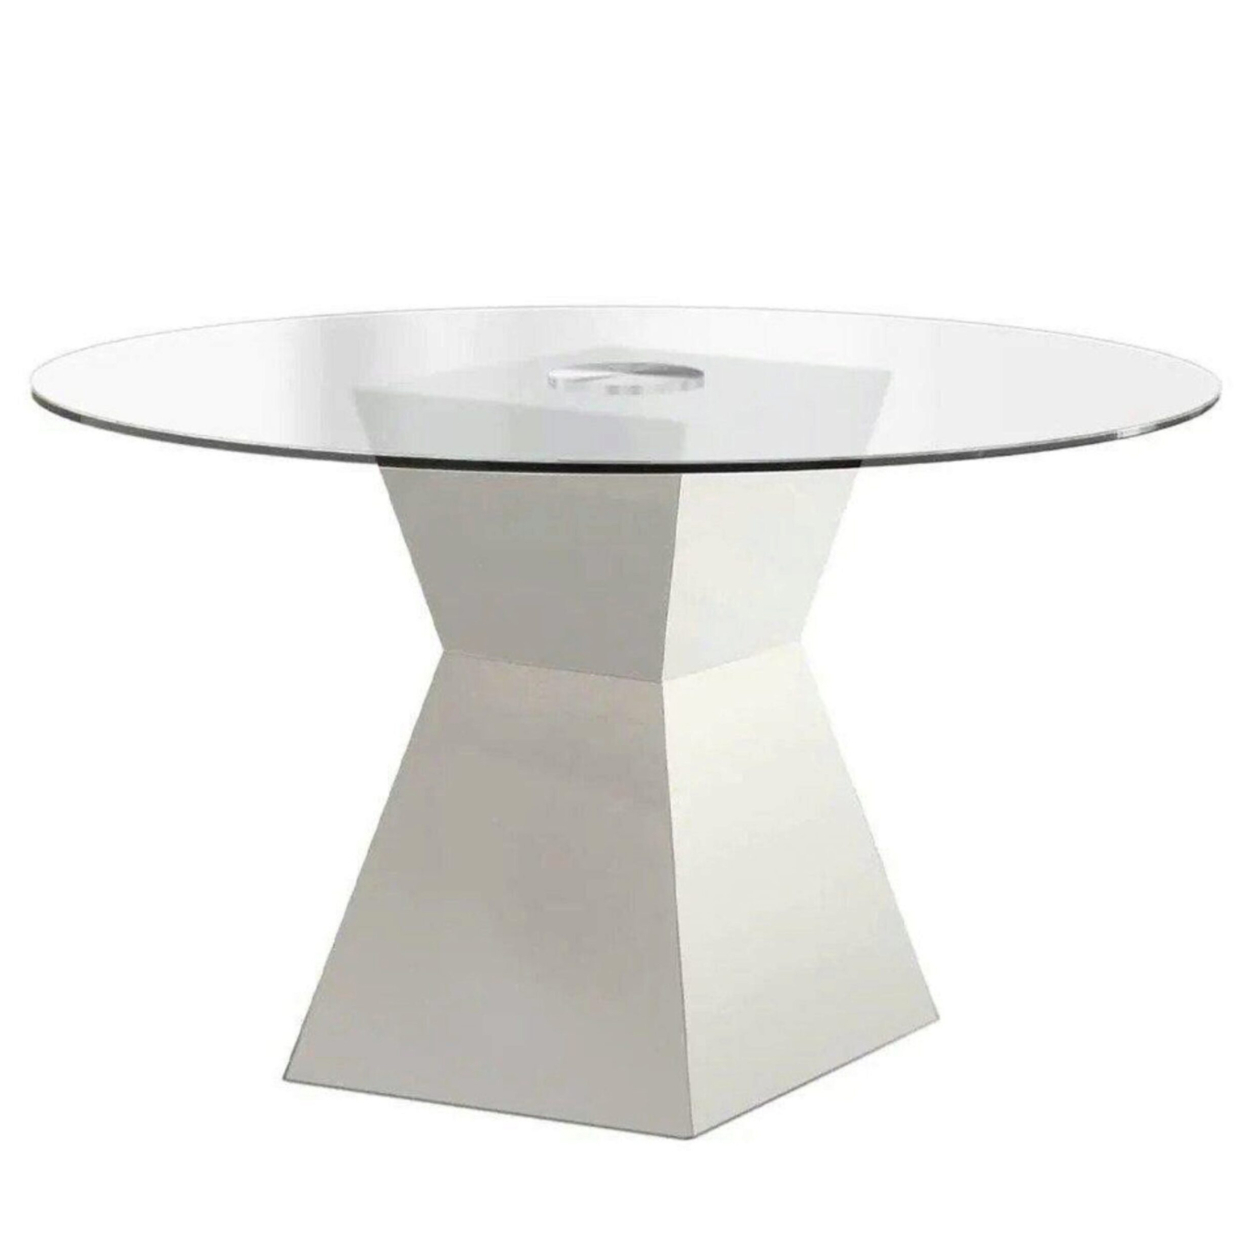 Contemporary Round Glass Dining Table With Square Pedestal Base, White- Saltoro Sherpi